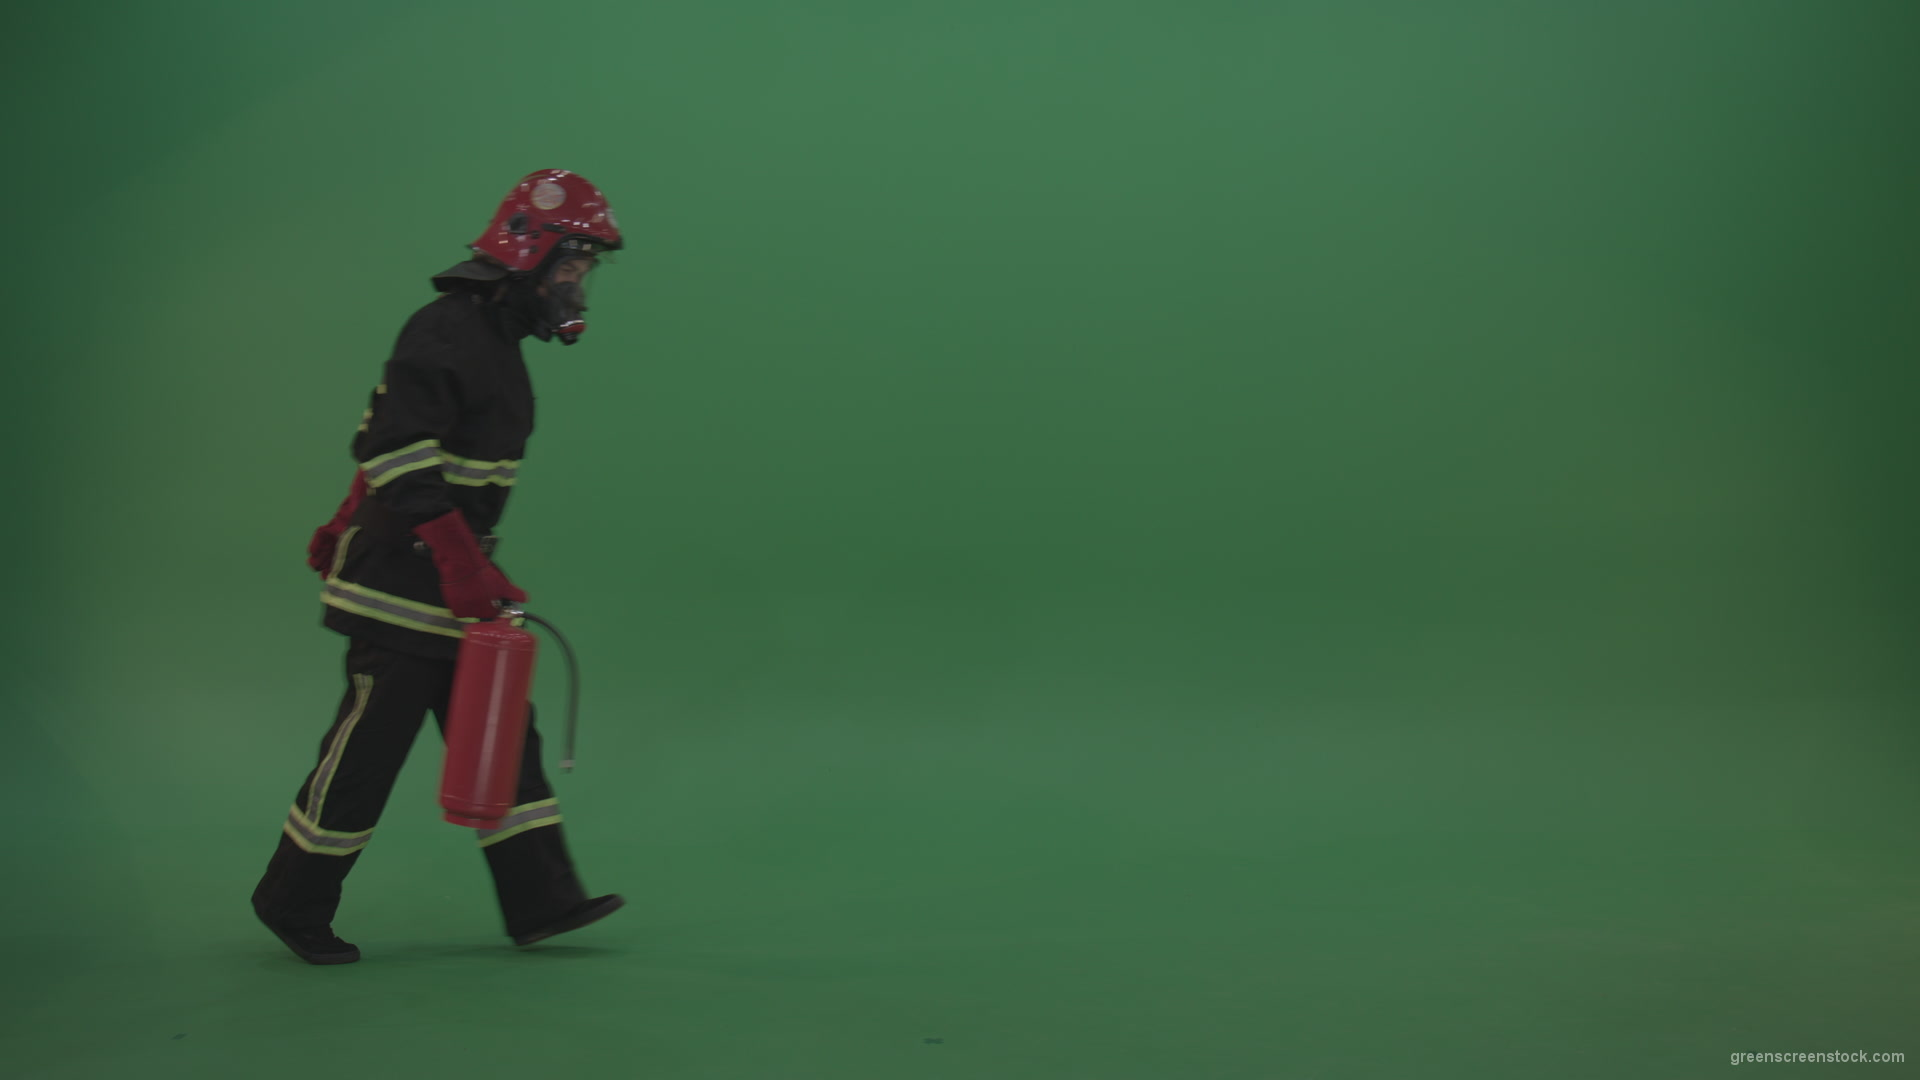 Strong_Firefighter_Keeping_Fire_Extinguisher_And_Wearing_Fireman_Working_Kit_Costume_Running_From_One_Side_To_Another_On_Green_Screen_Wall_Background_005 Green Screen Stock